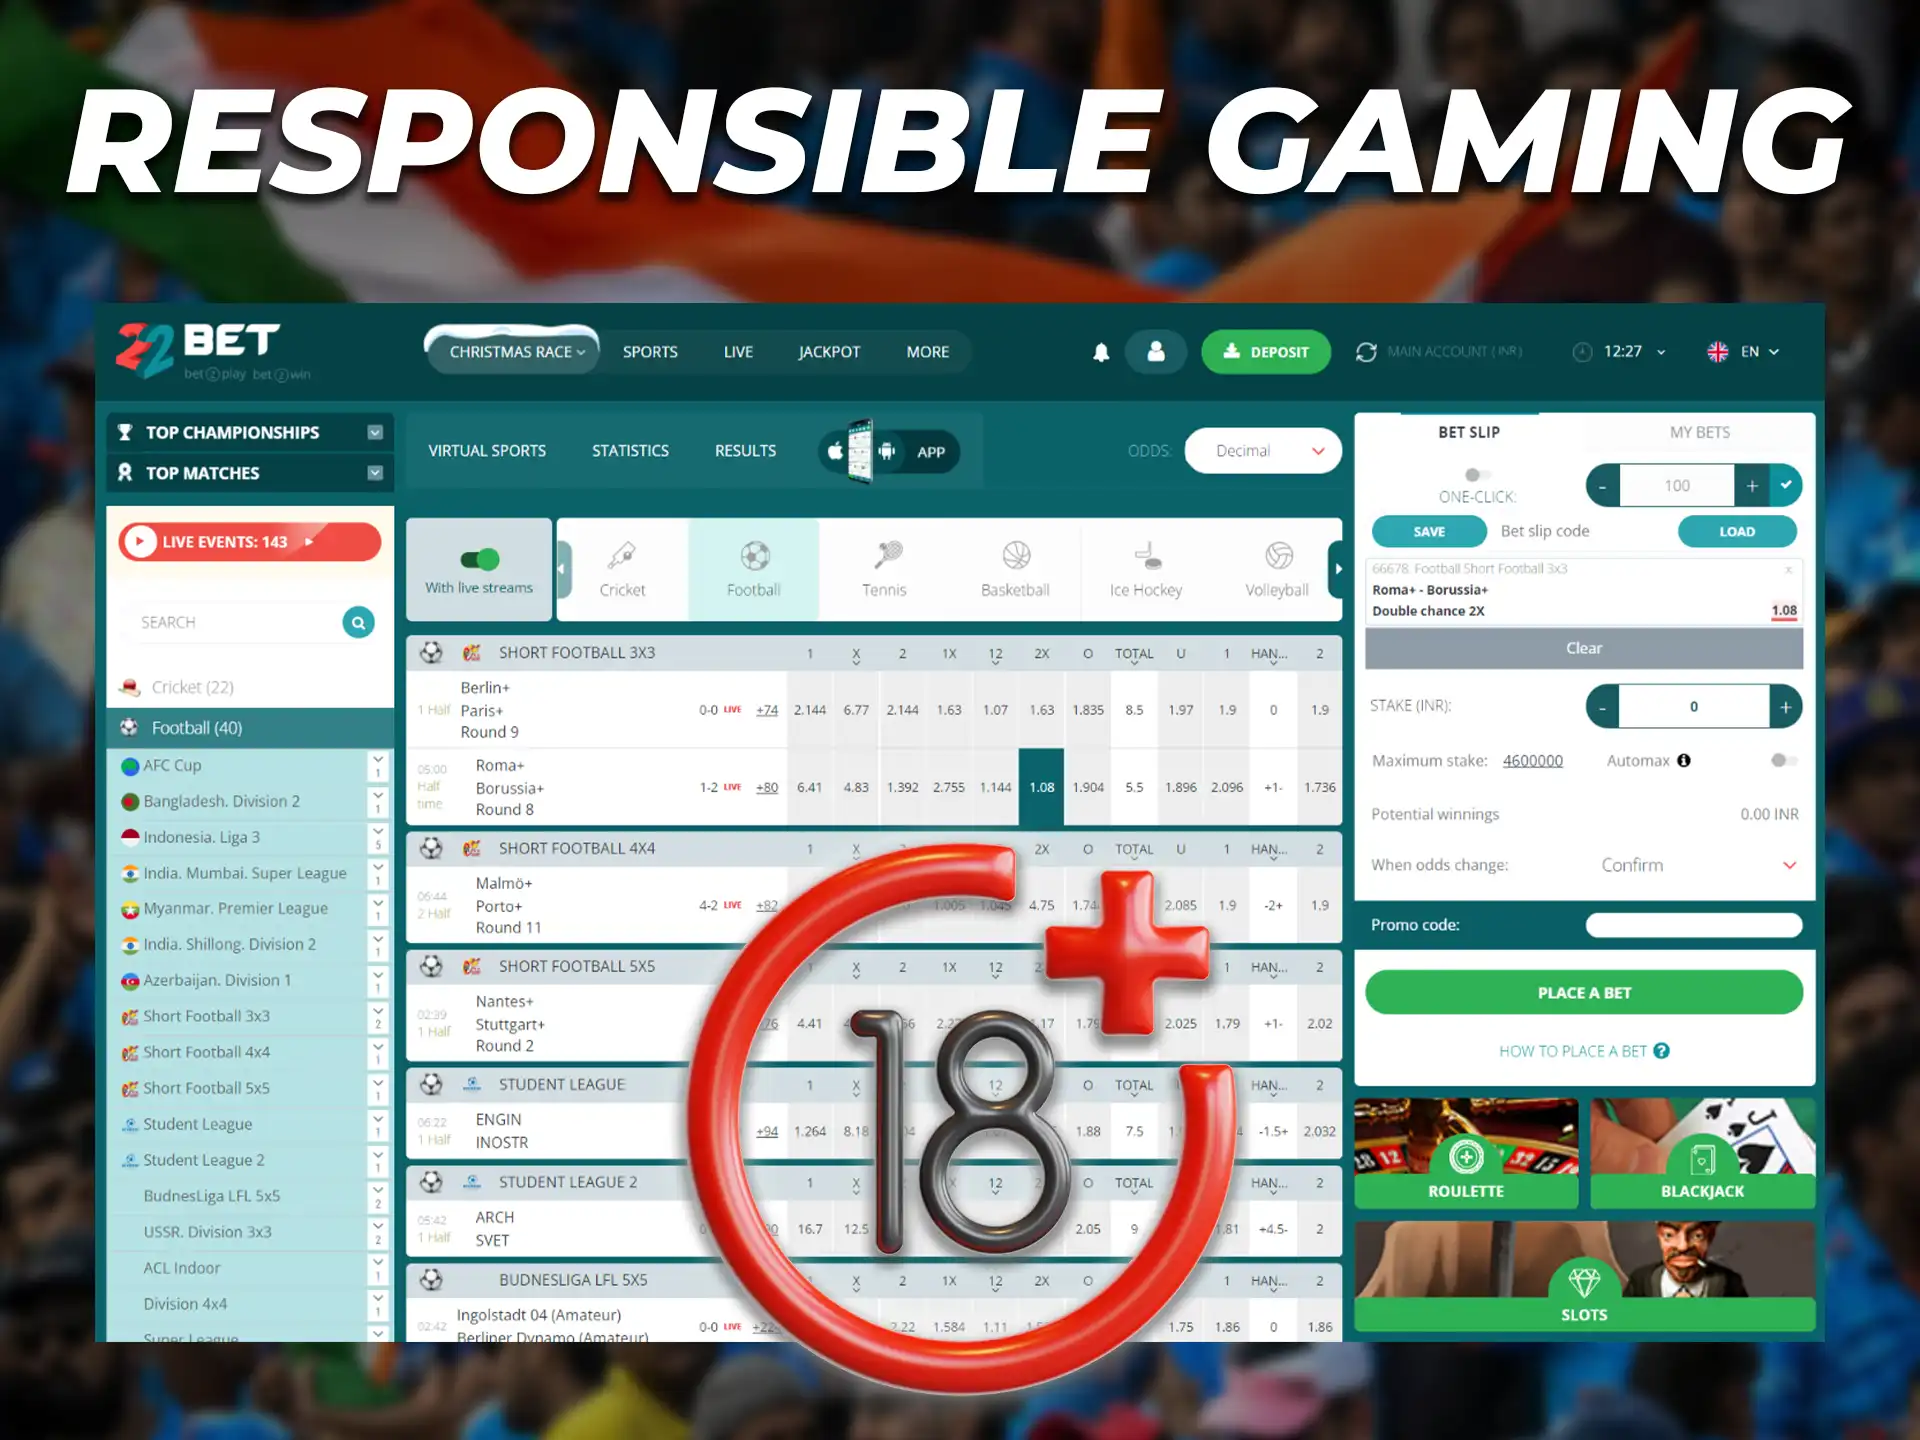 We are for responsible gambling and a sustainable gaming environment for Indian users.